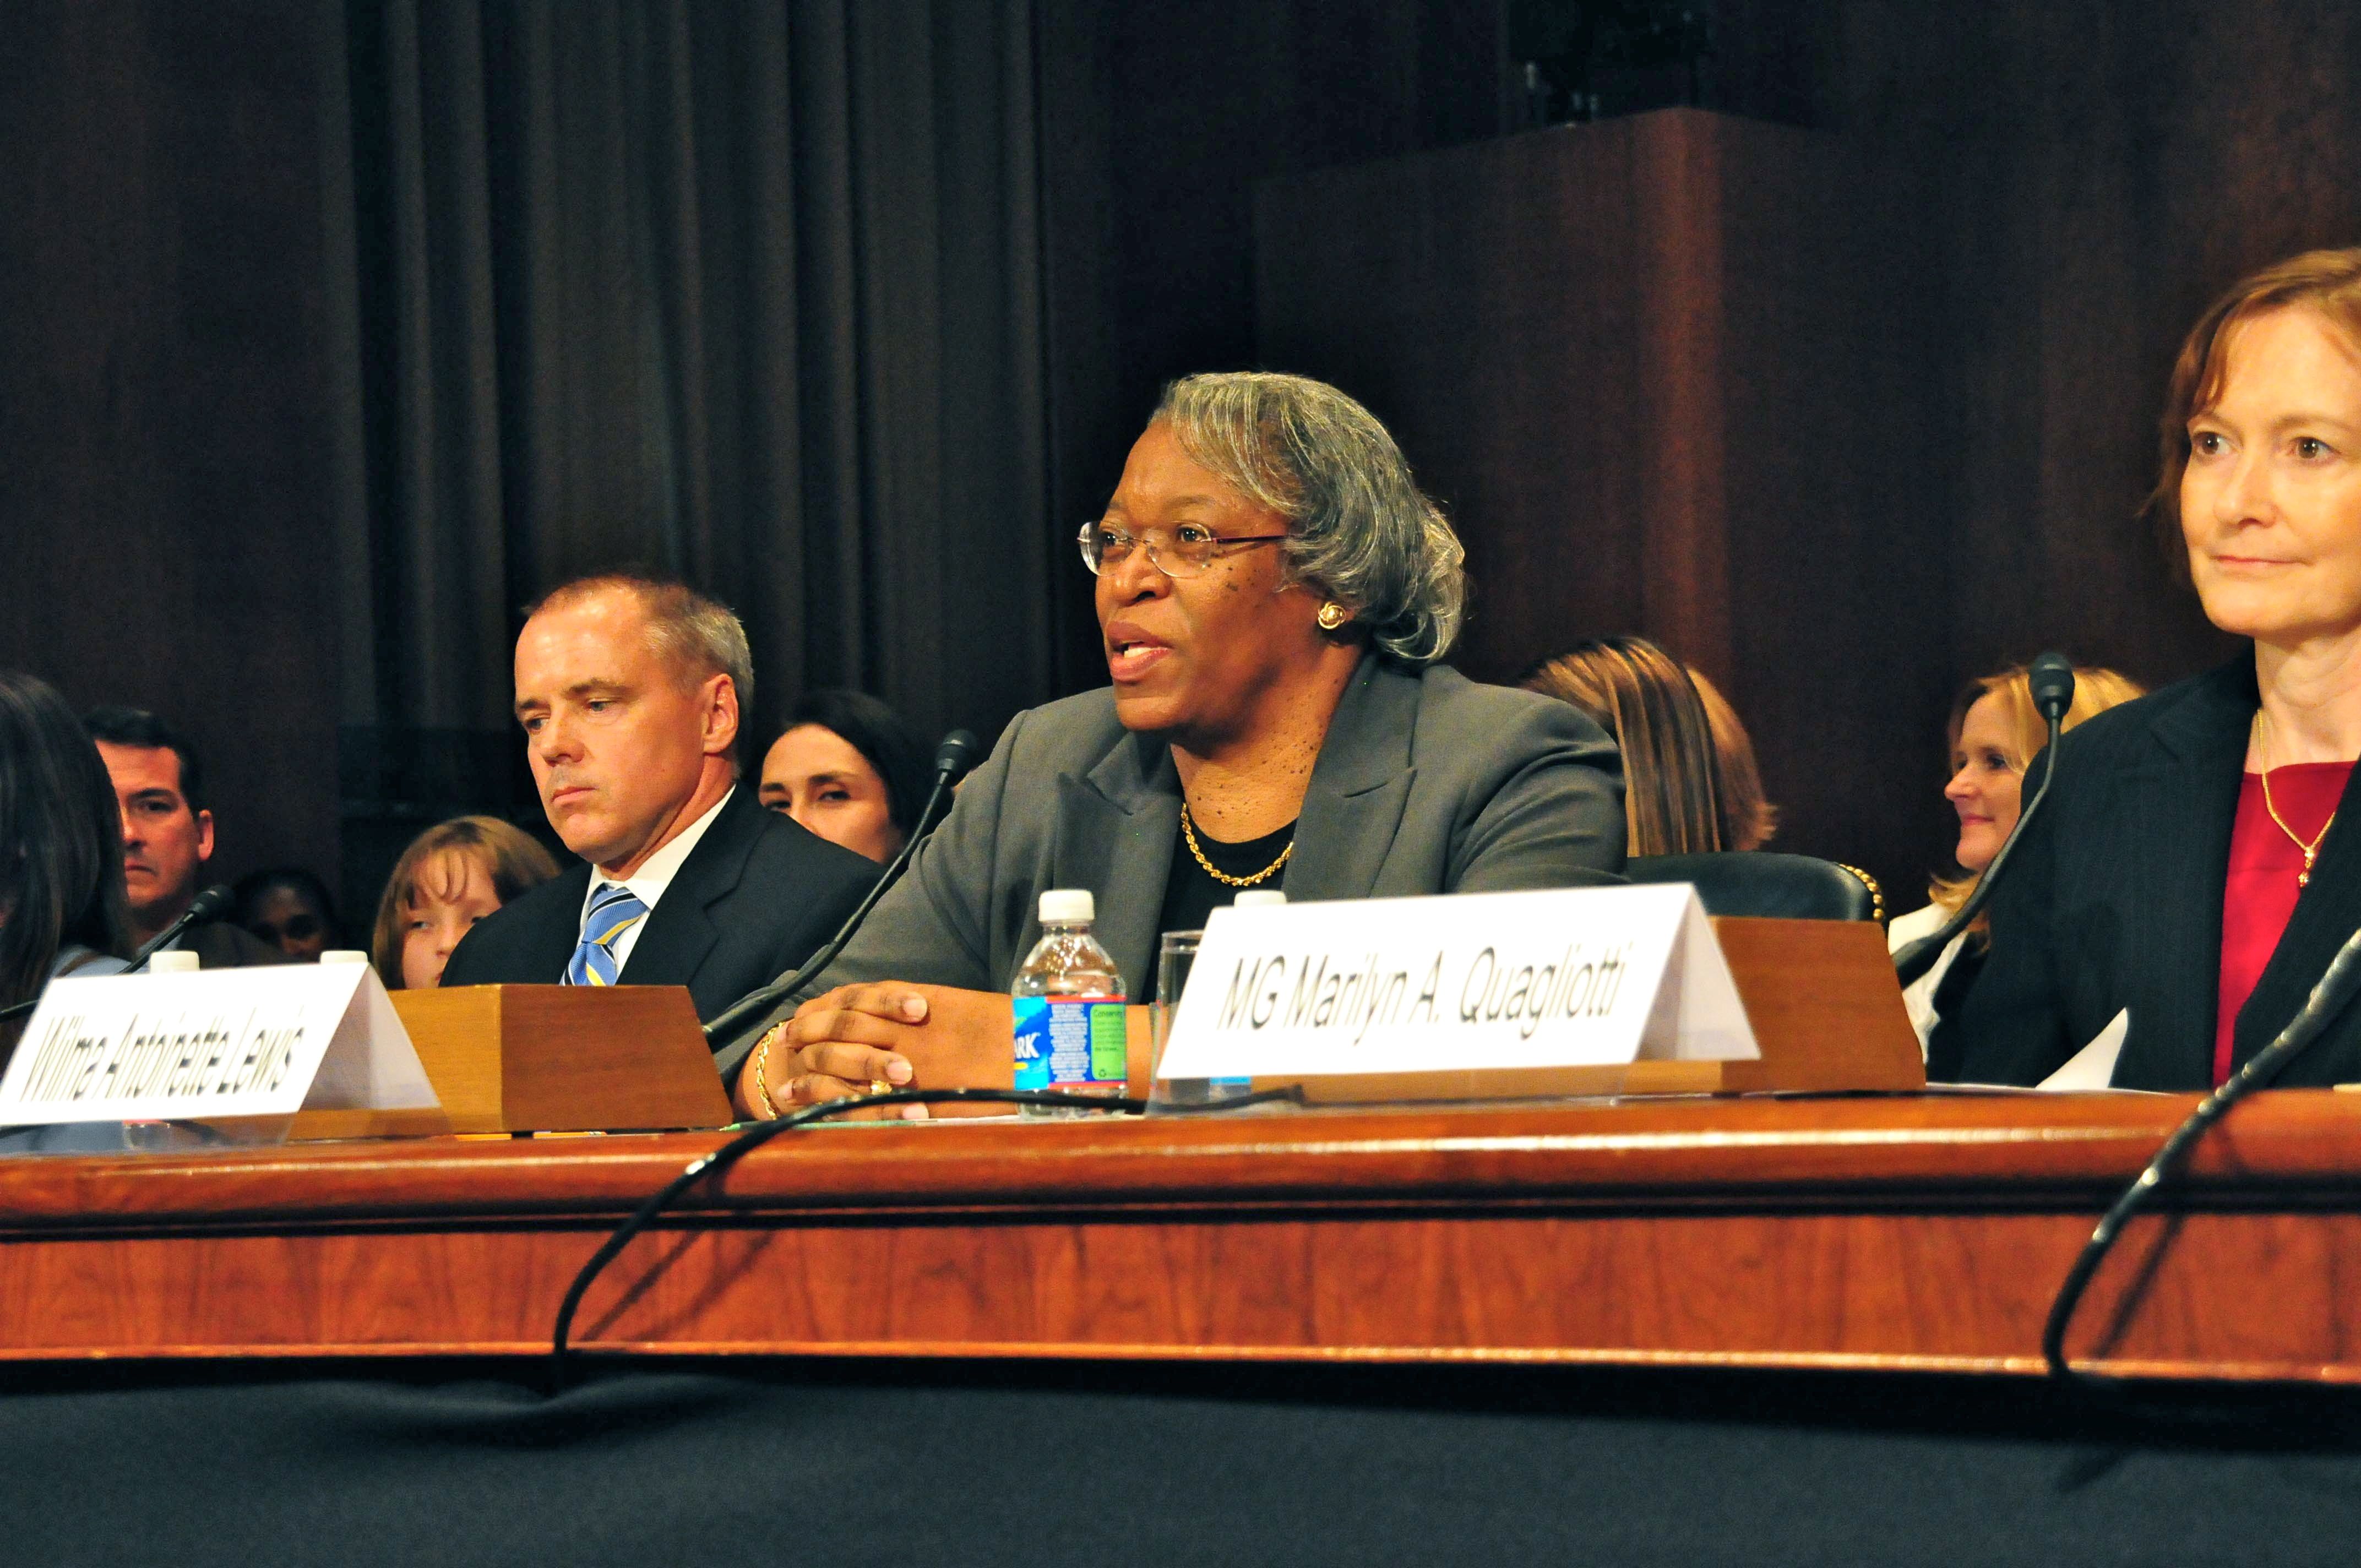 Testifying before Congress Tuesday, Wilma Lewis promised impartiality to all litigants.